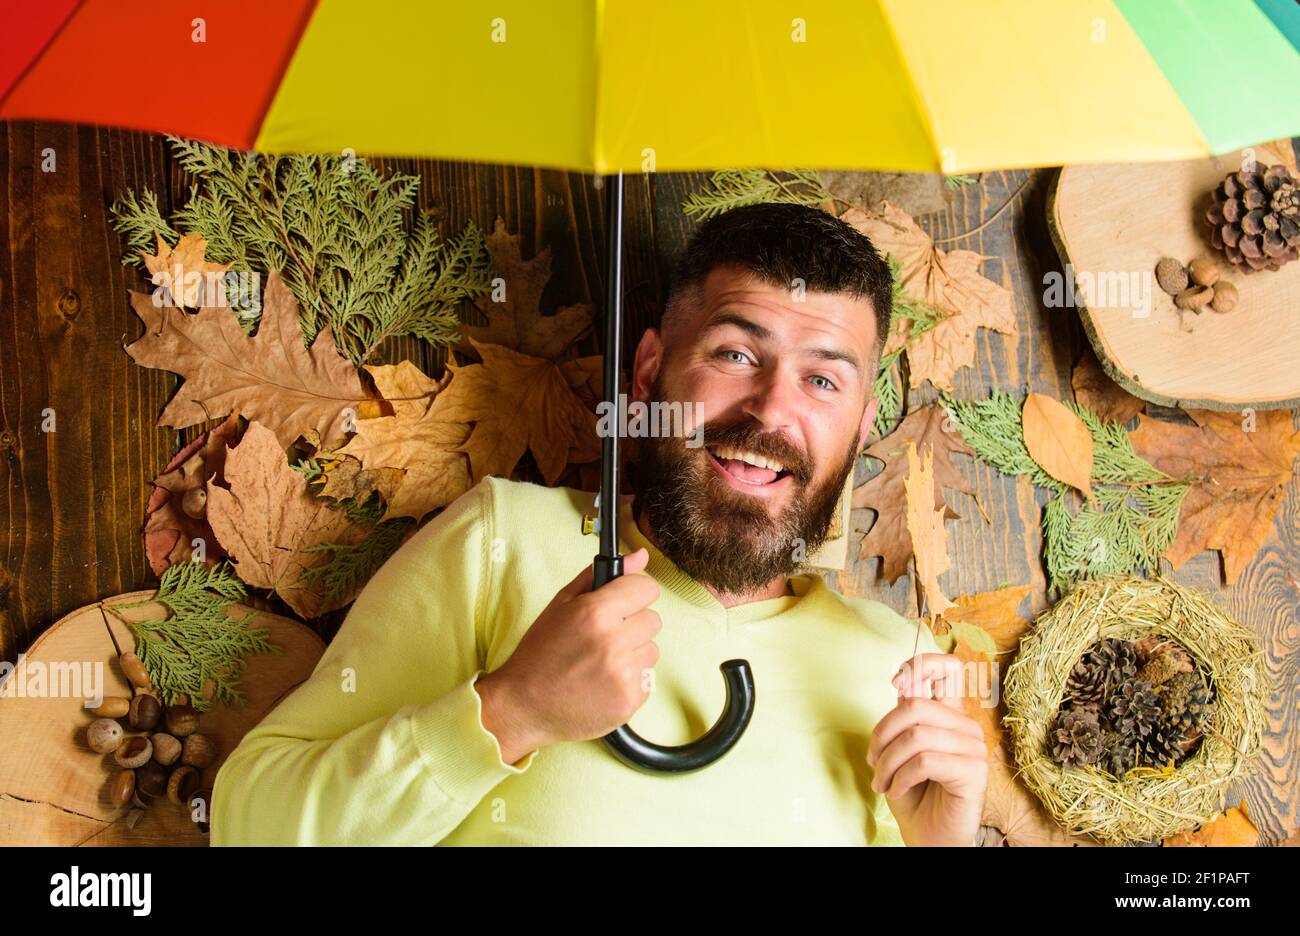 Fall atmosphere attributes. Hipster with beard mustache expect rainy weather hold umbrella enjoy season. Man bearded lay on wooden background with leaves top view. Rainy weather forecast concept. Stock Photo